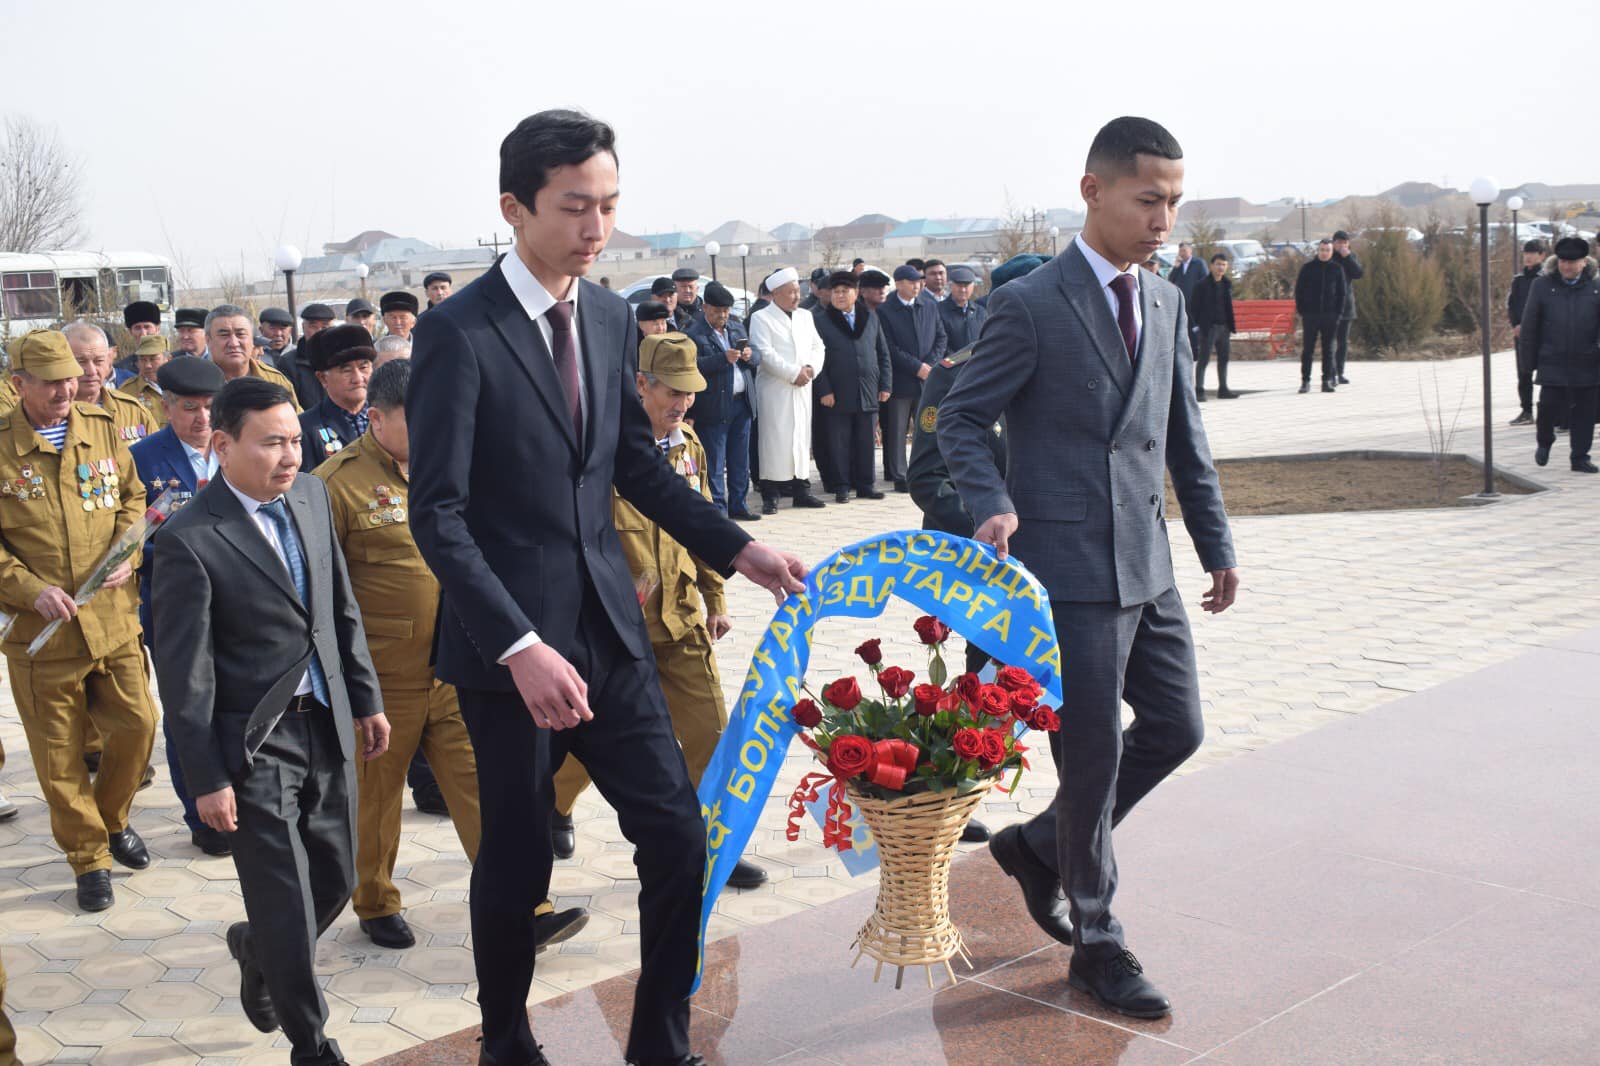 A FLOWER-LAYING CEREMONY WAS HELD AT THE MONUMENT TO THE SOLDIERS OF THE AFGHAN WAR